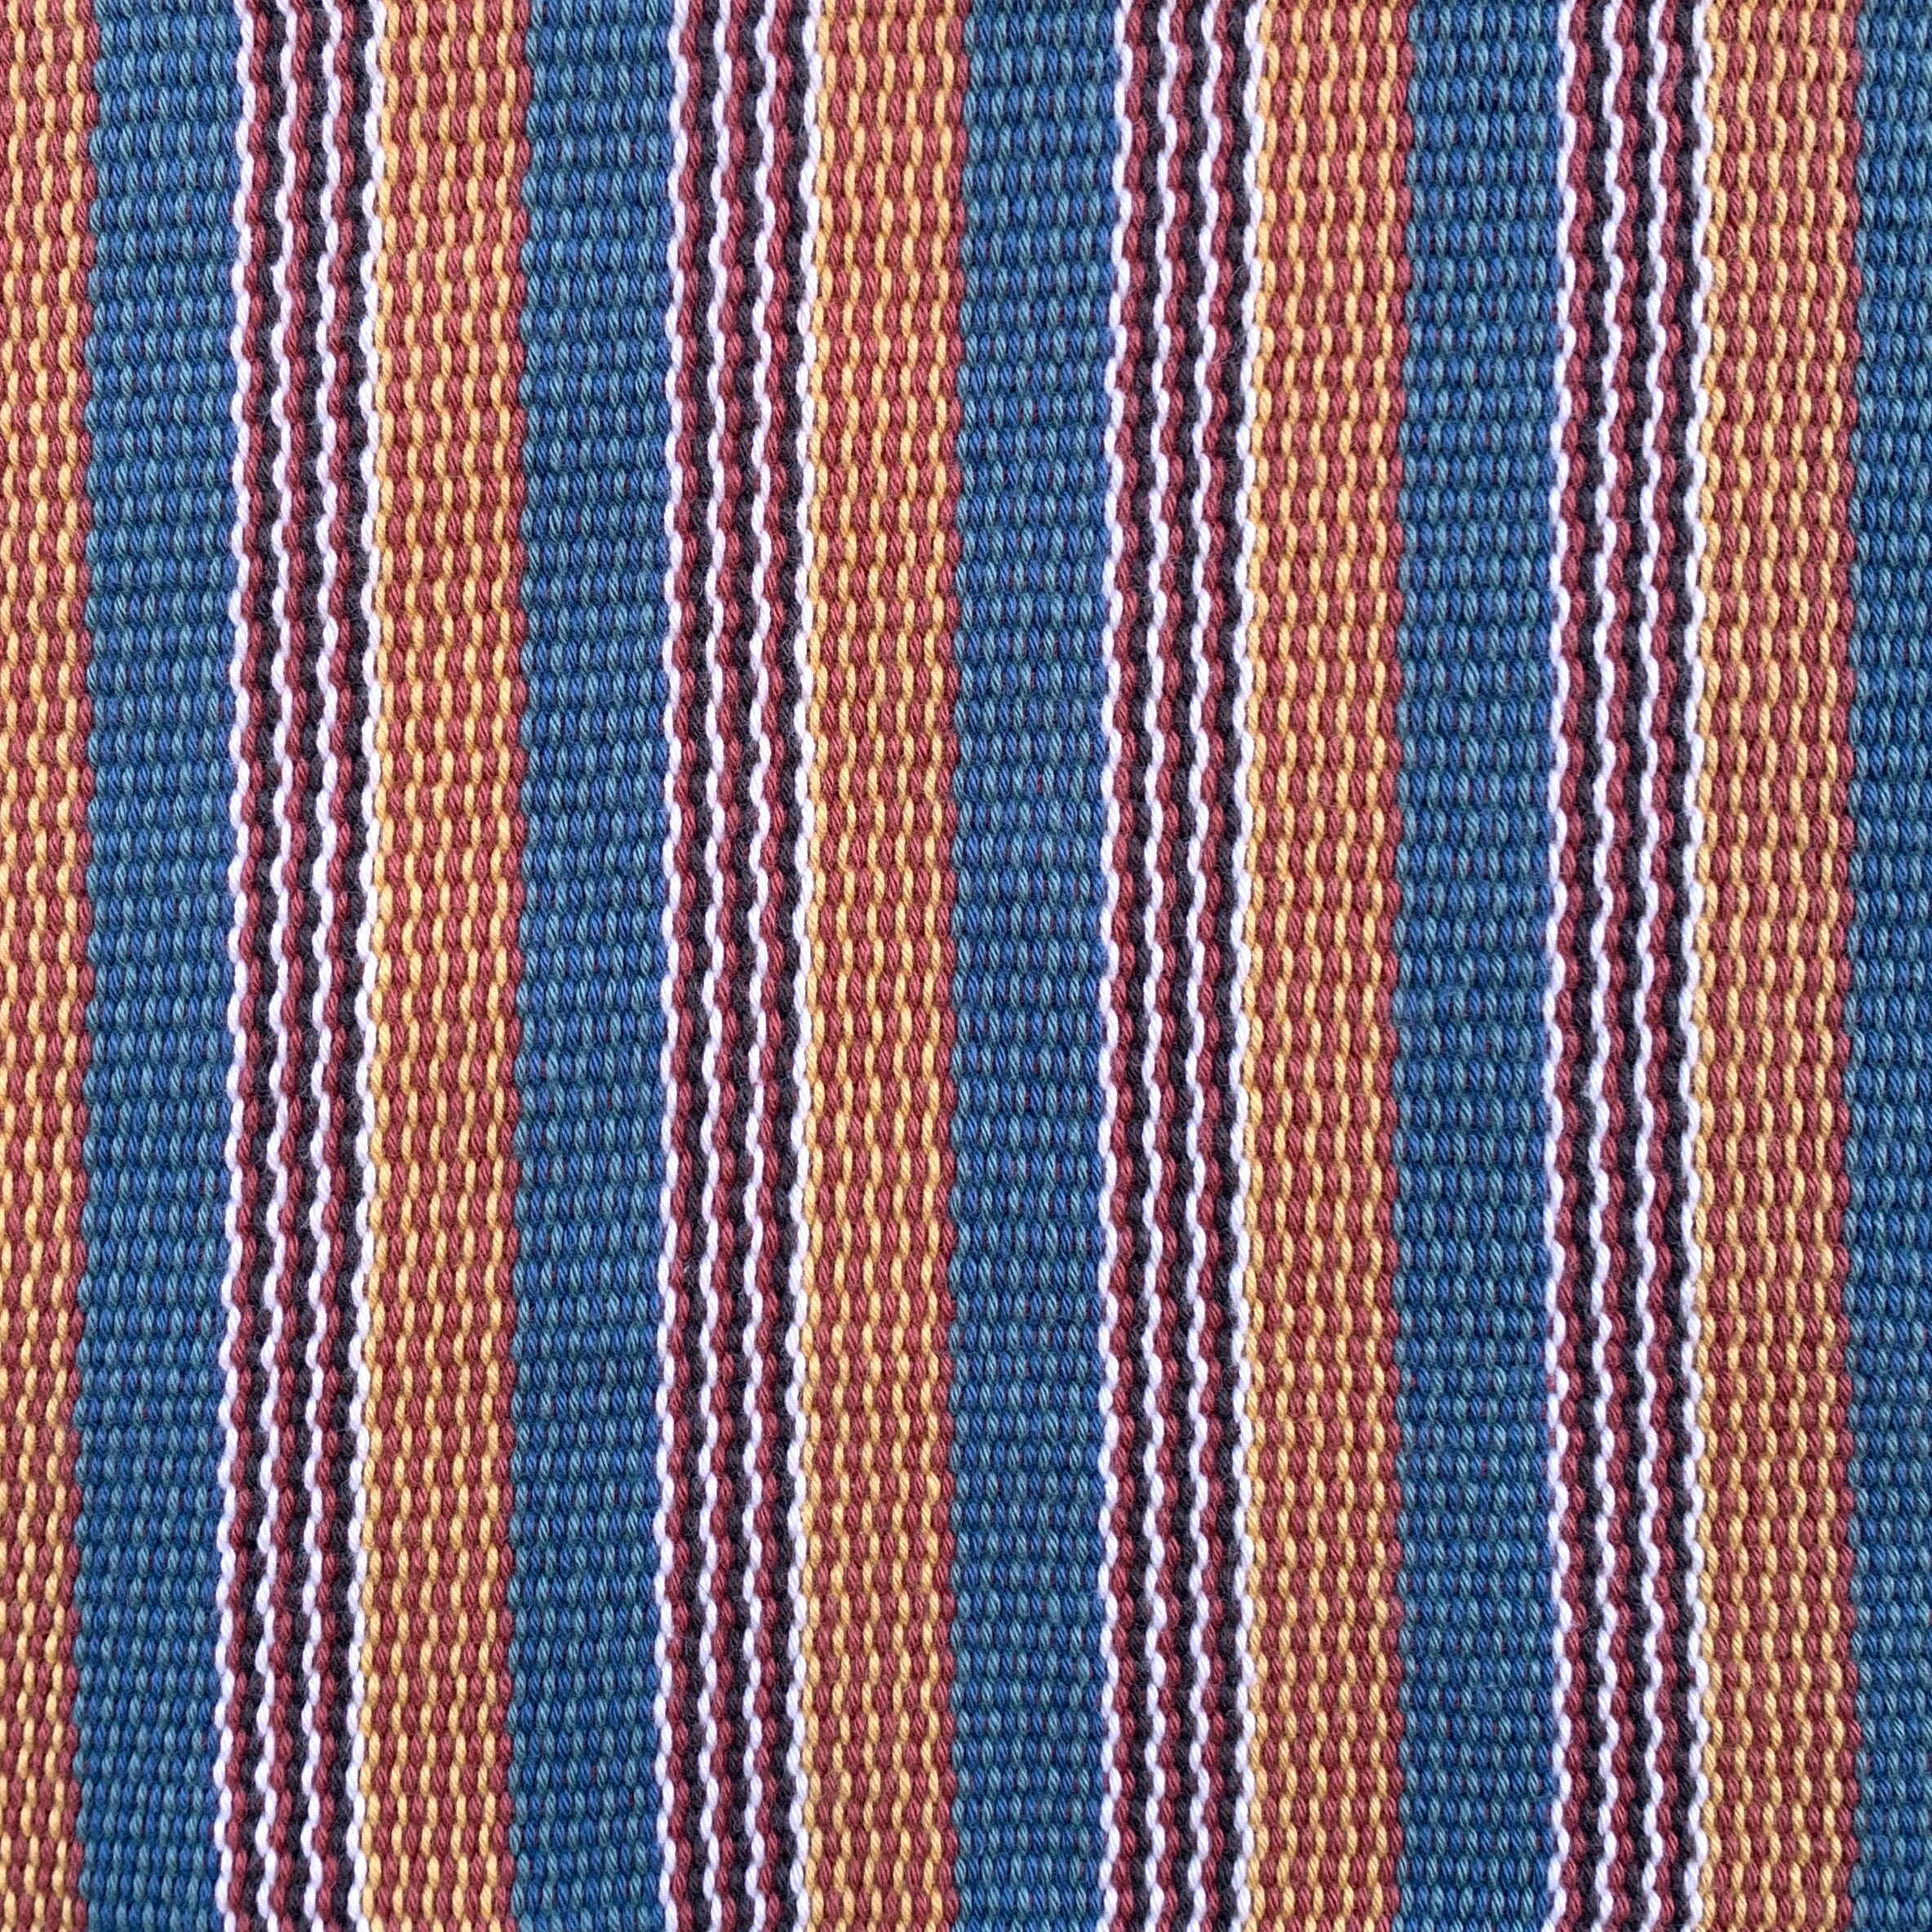 Detail of a hand-woven cotton fabric in a stripe pattern in shades of blue, pink, yellow and teal.